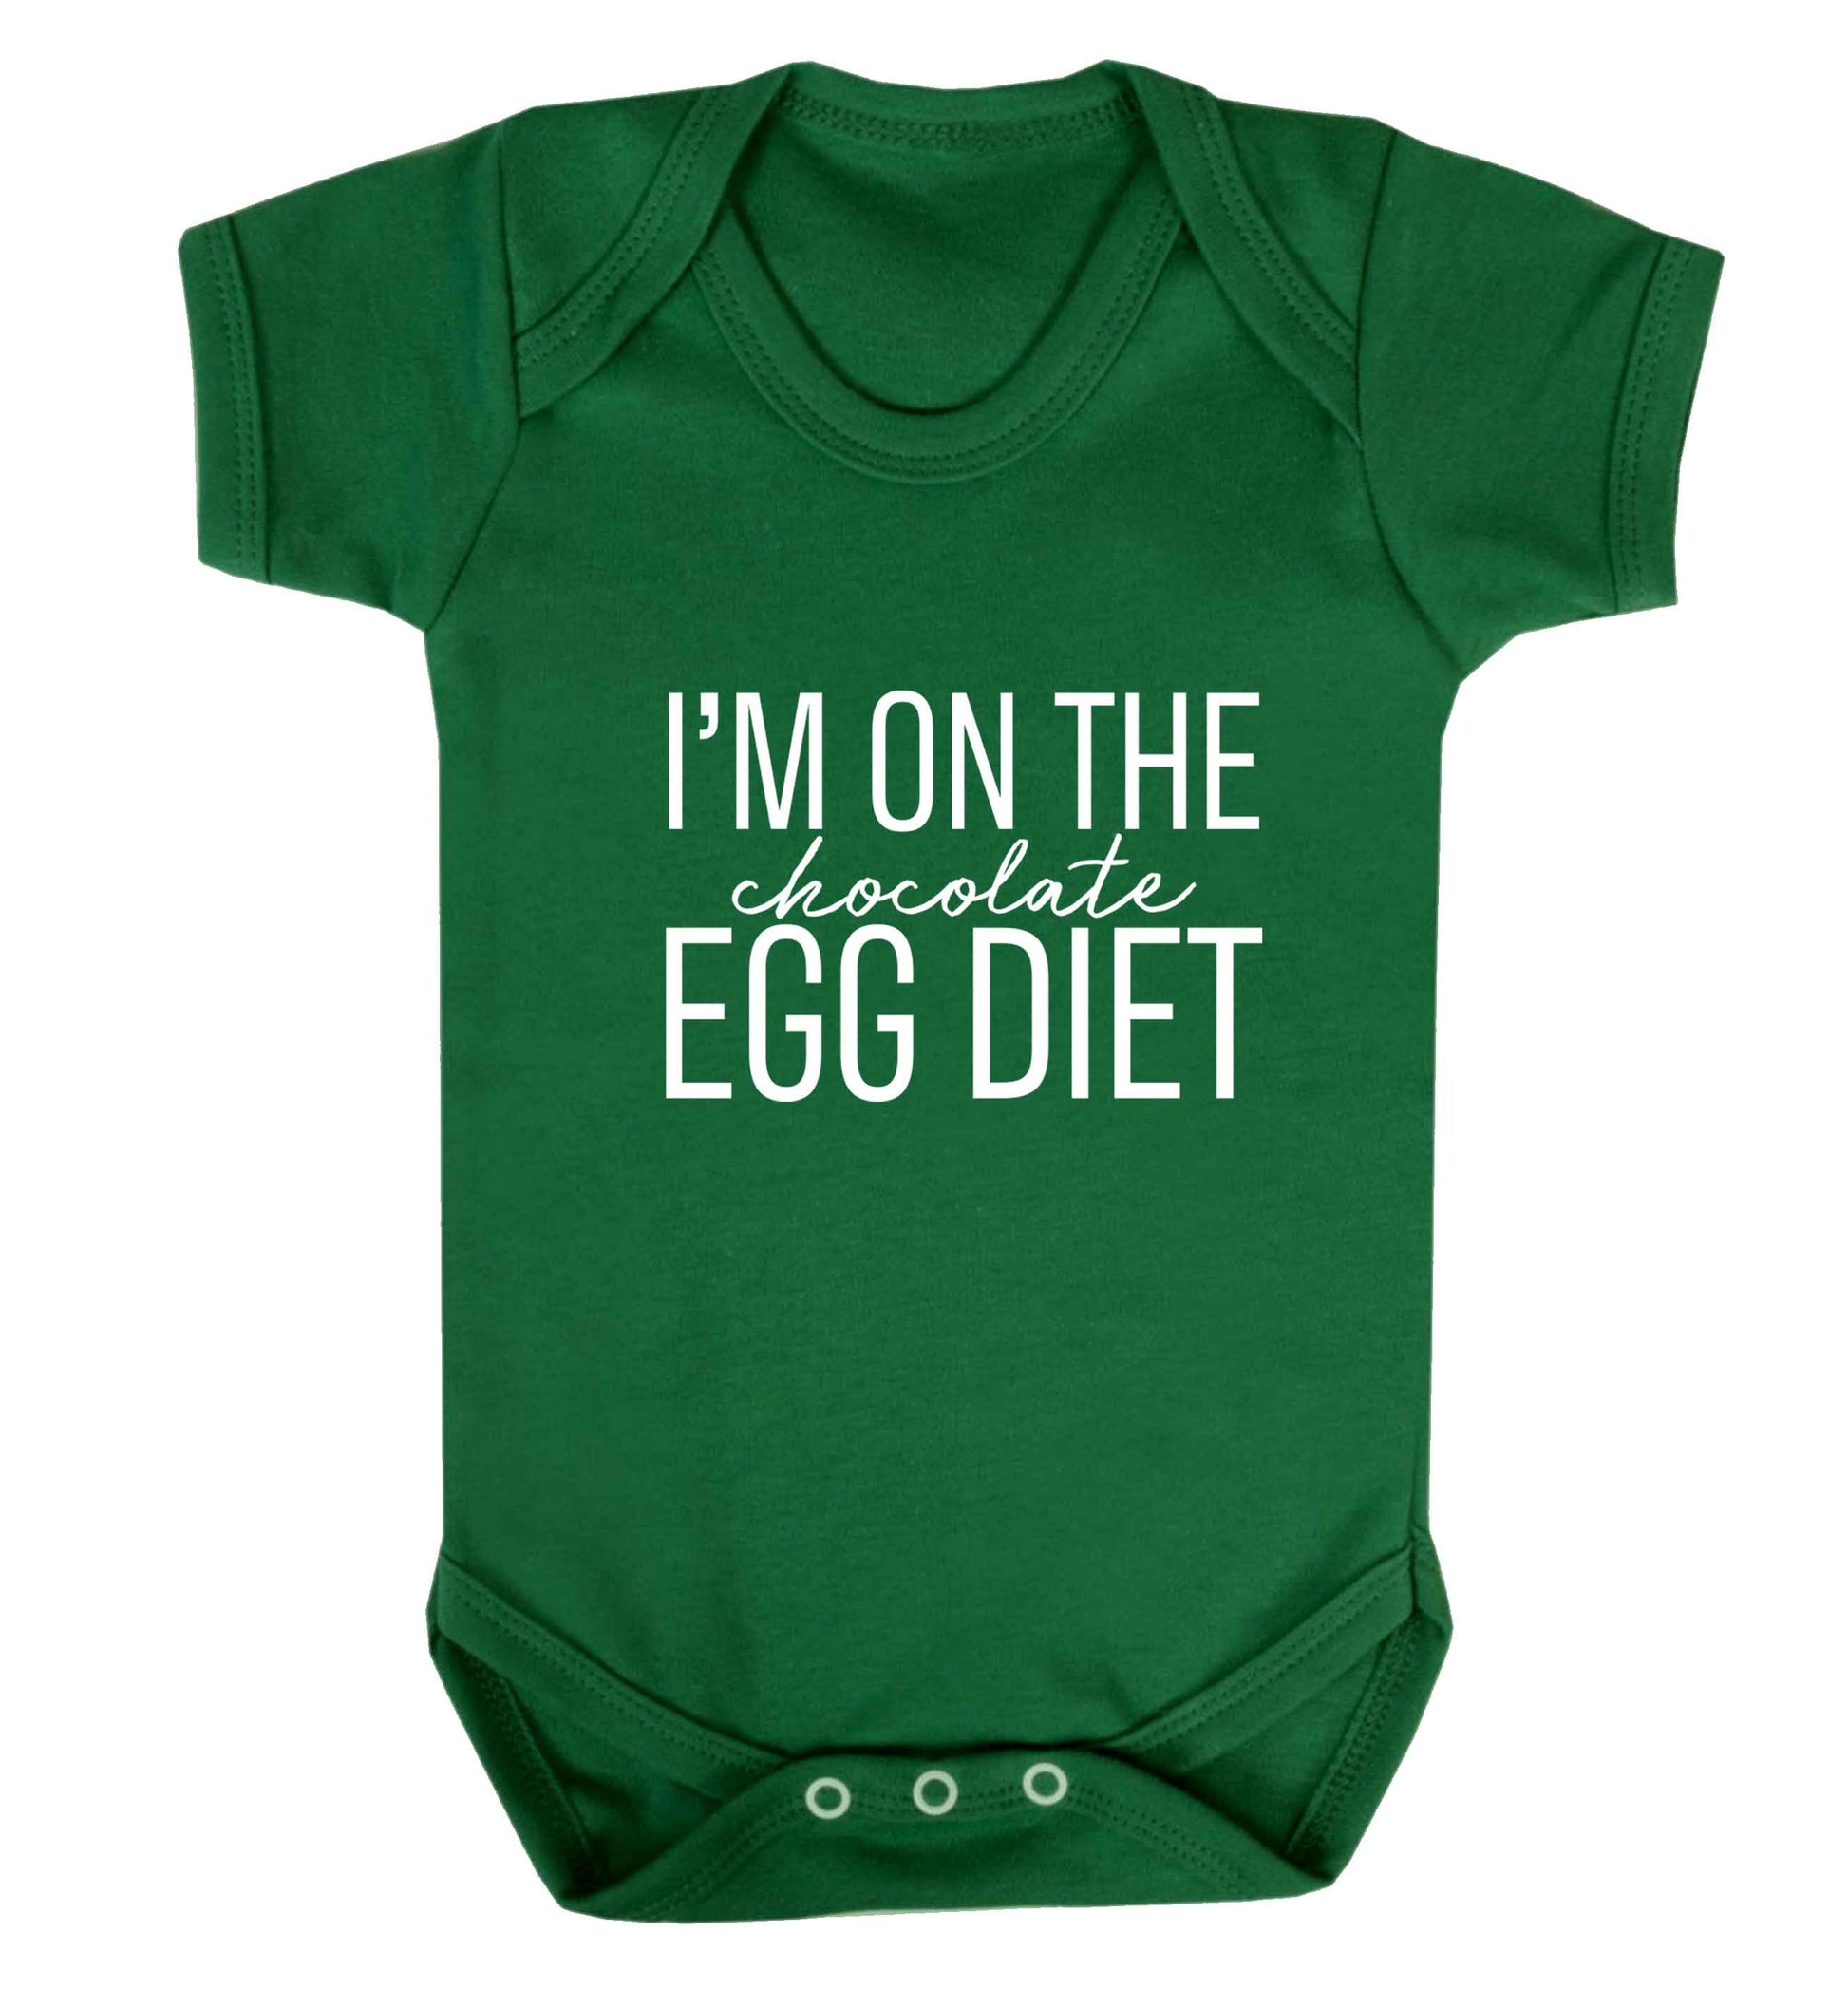 I'm on the chocolate egg diet baby vest green 18-24 months